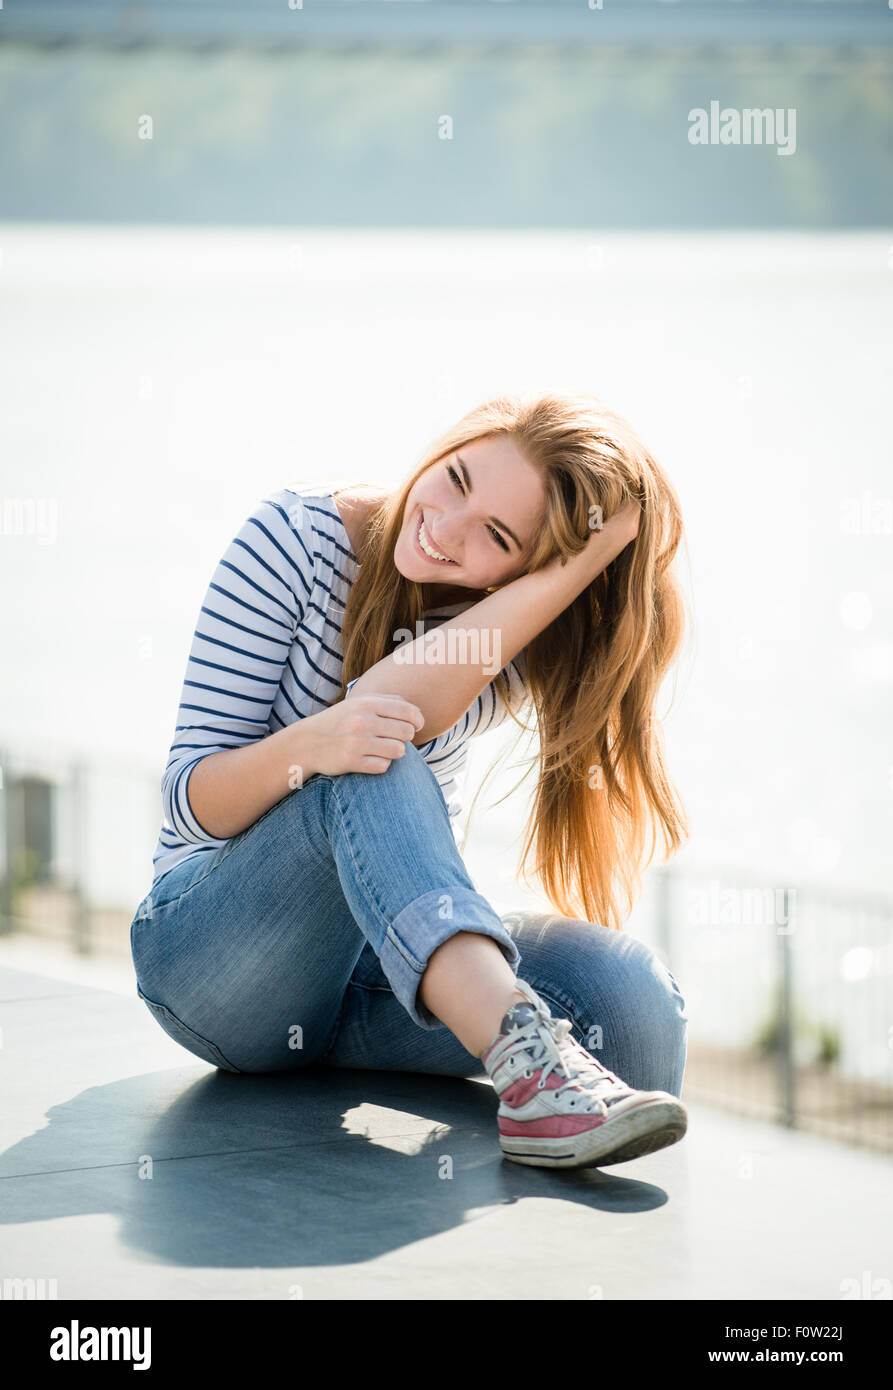 Teenager portrait - smiling girl outdoor on sunny day Stock Photo